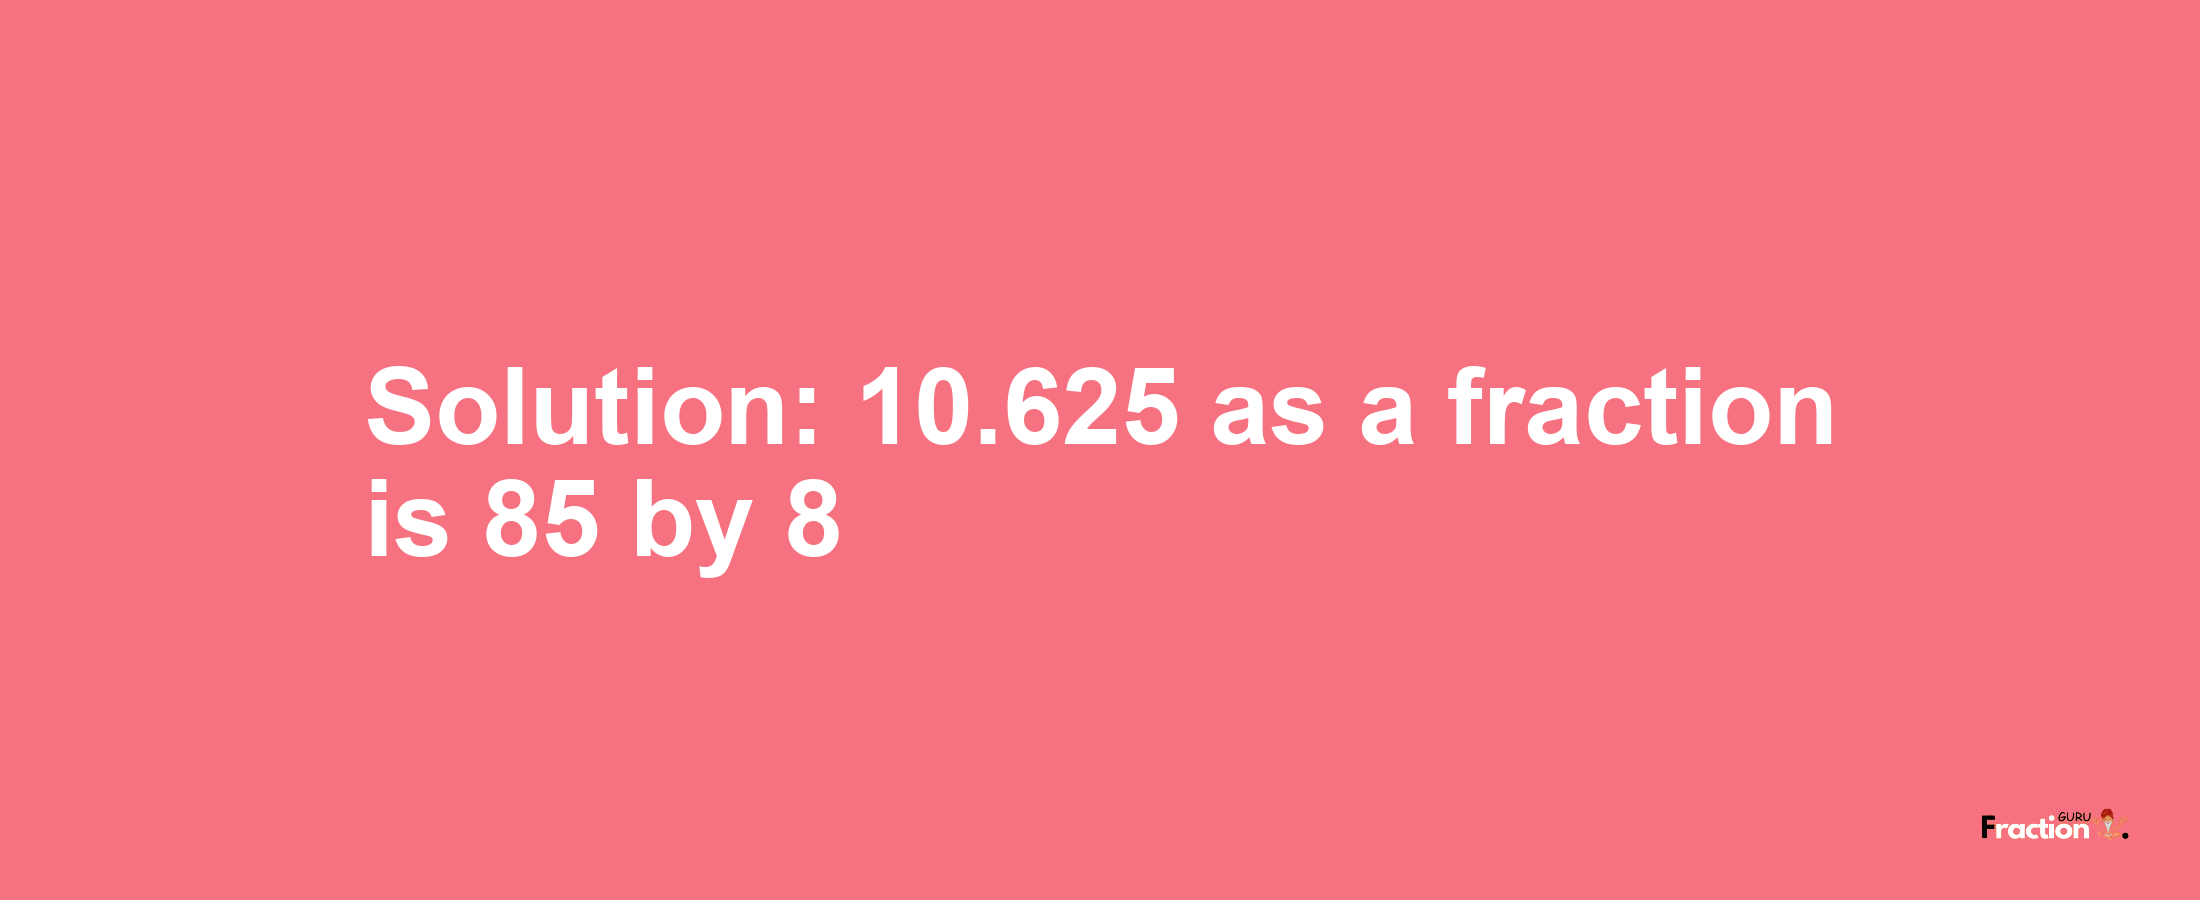 Solution:10.625 as a fraction is 85/8